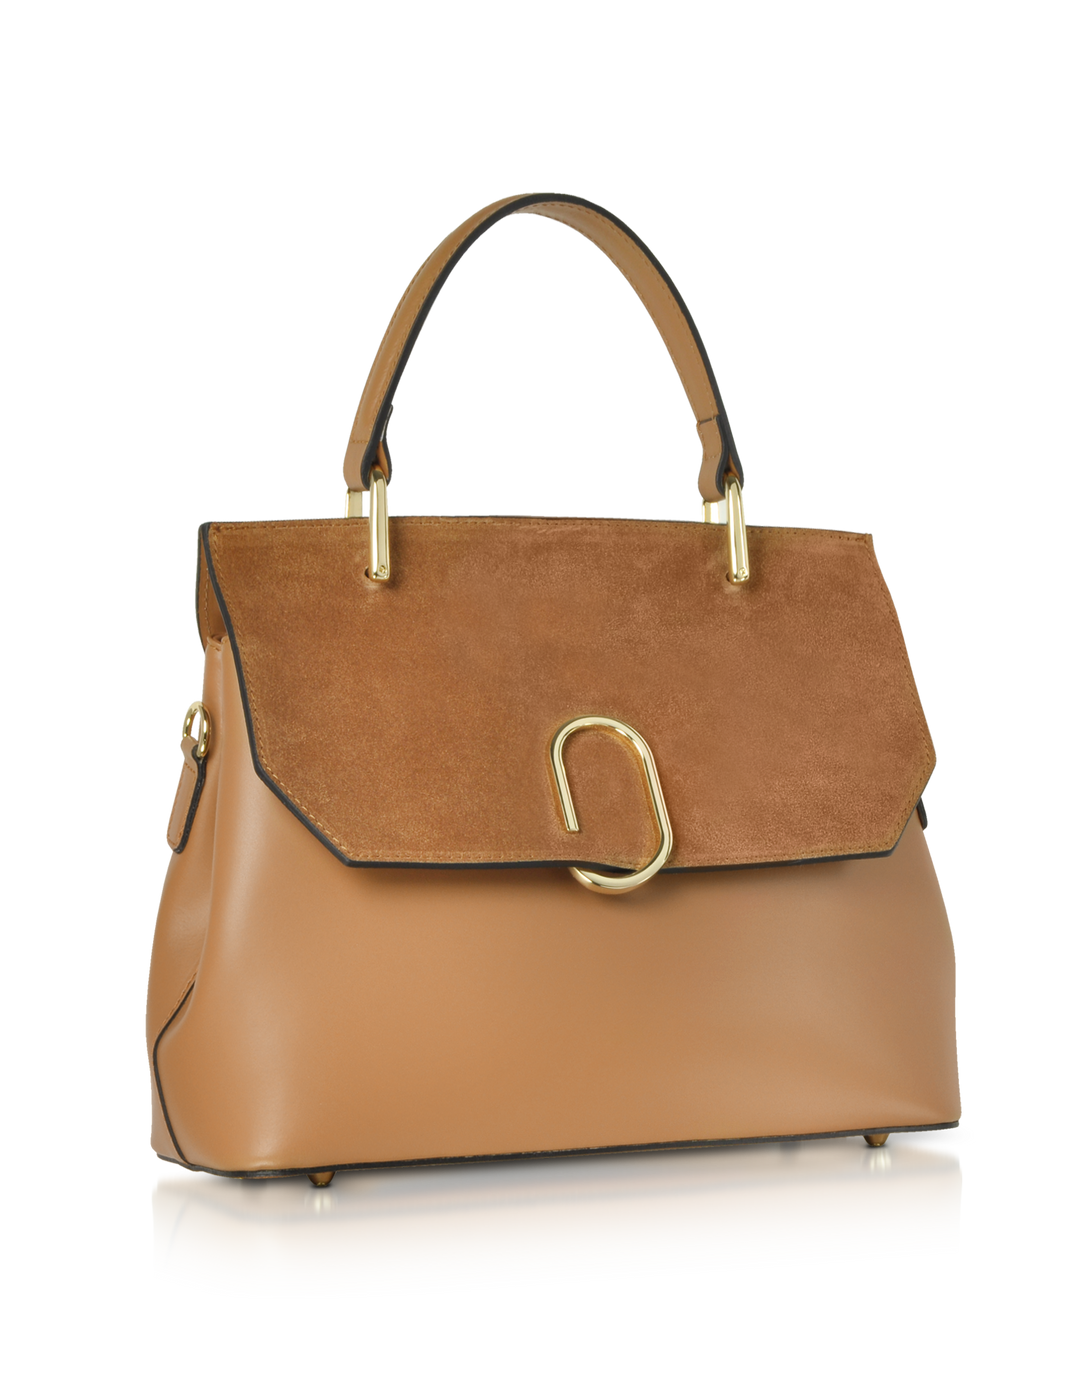 Elegant tan leather handbag with gold hardware and suede flap